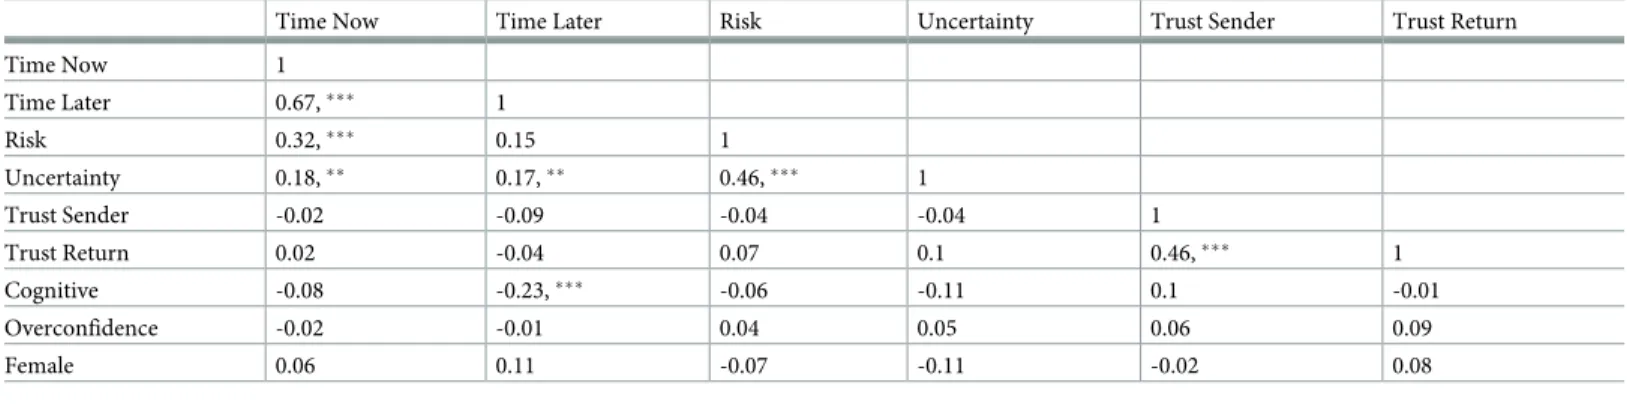 Table 2. Correlation coefficients and significance level between variables in Dean and Ortoleva [76].